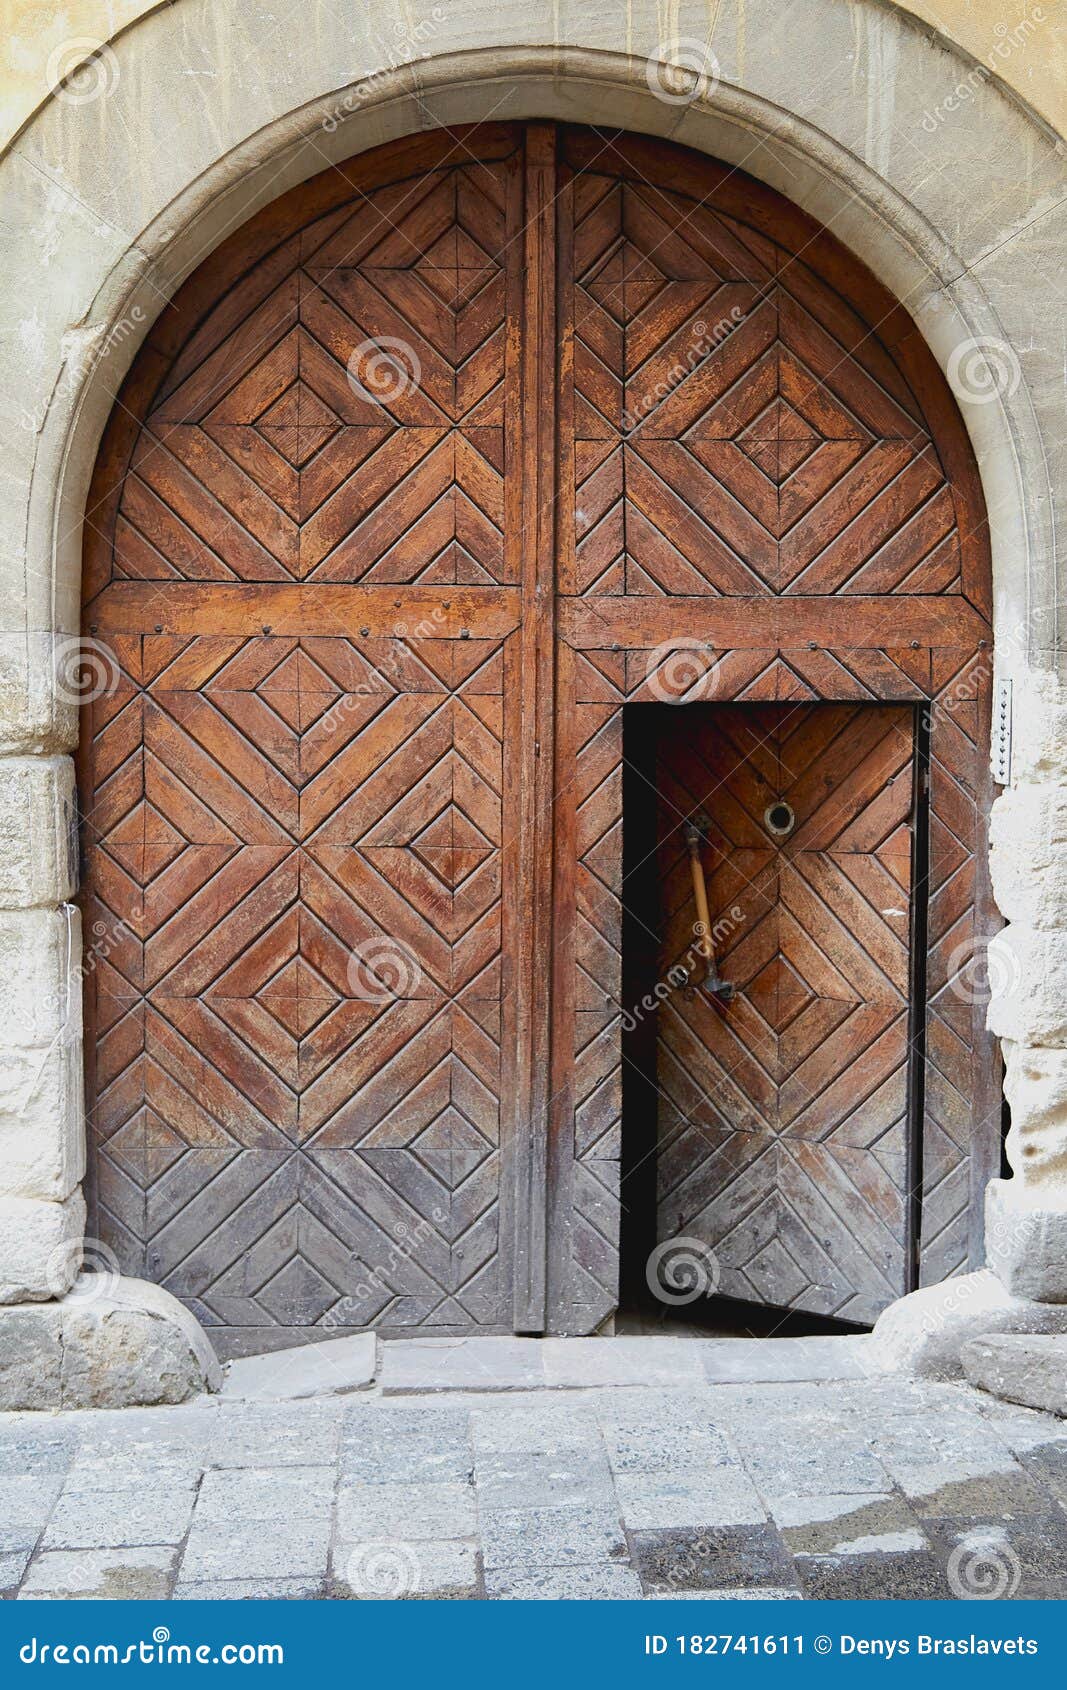 Old Medieval Open Gate of an Ancient Castle Stock Image - Image of